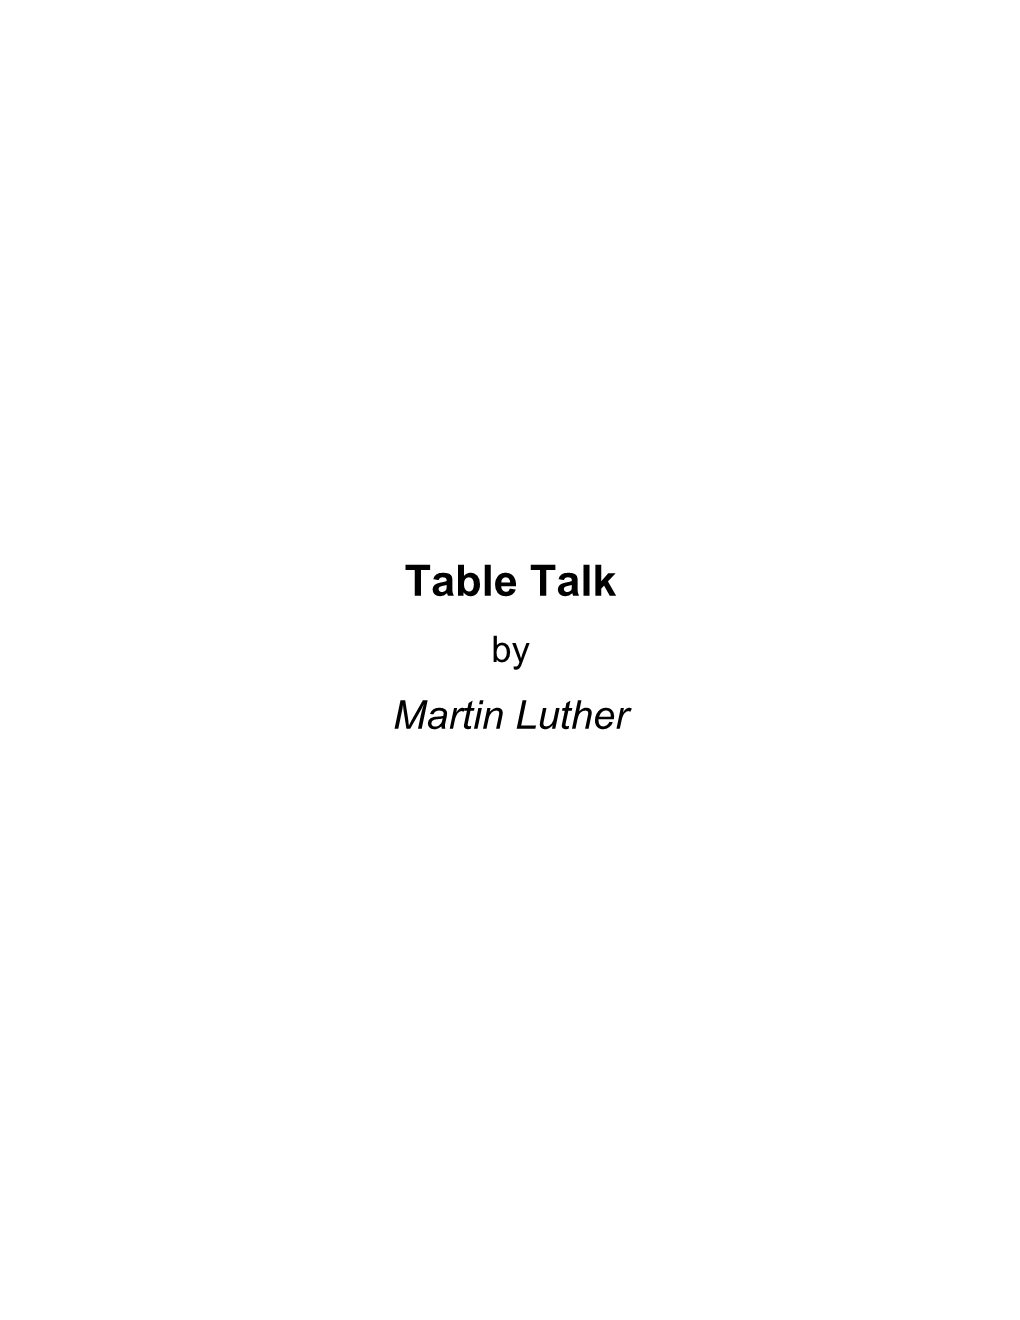 Martin-Luther-Table-Talk.Pdf